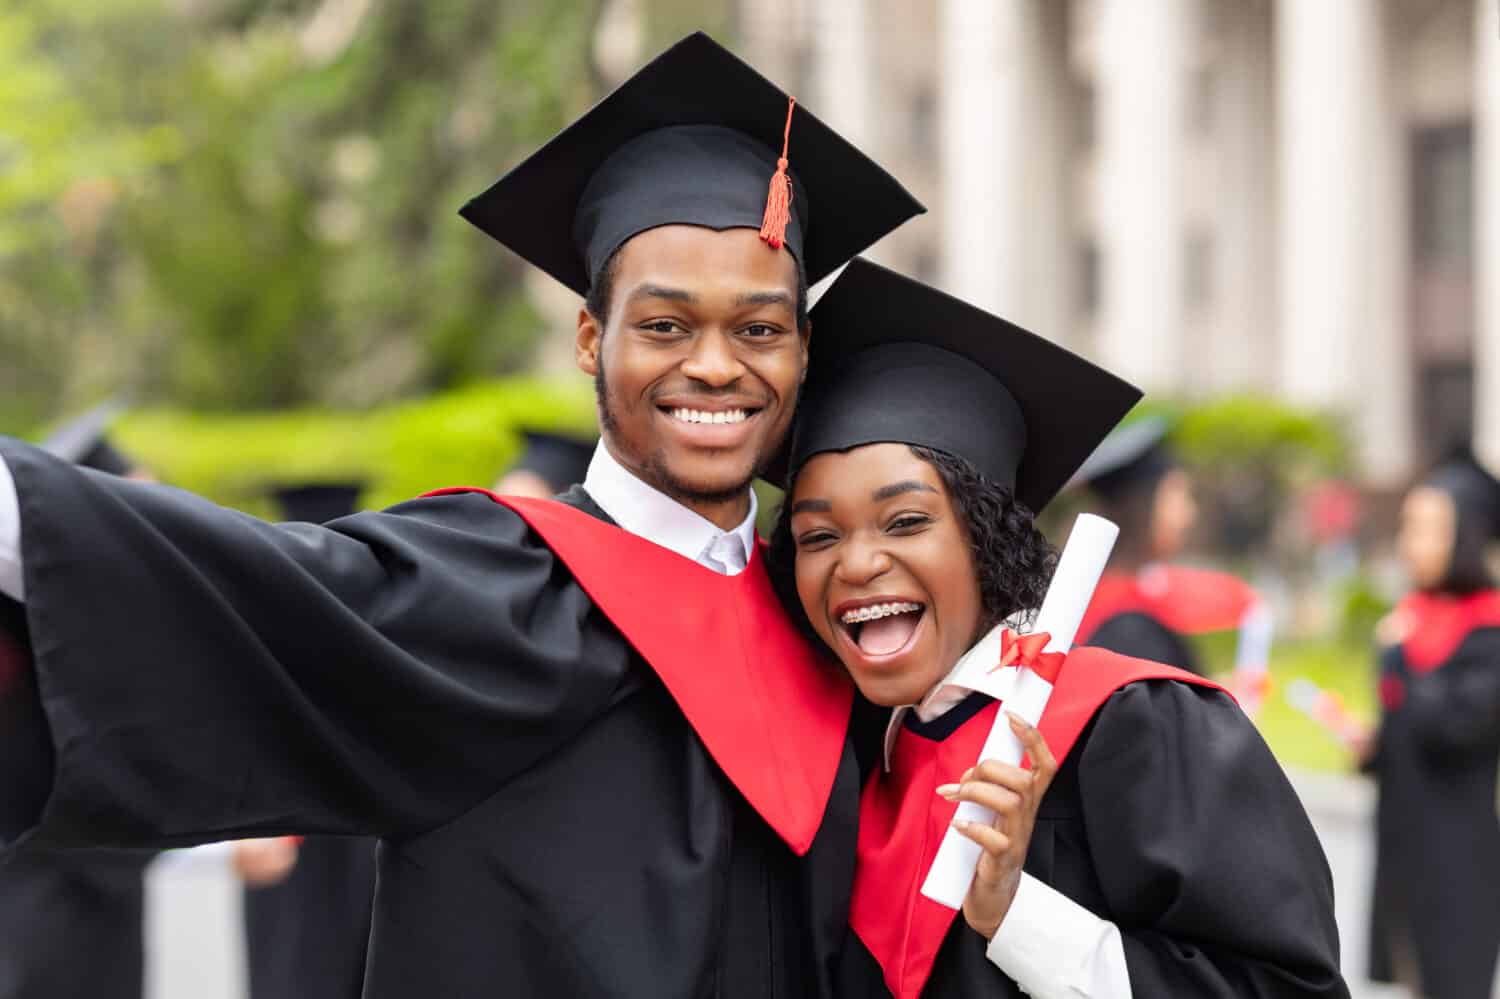 Happy african american couple students in graduation dresses and hats taking selfie together, posing at university campus, enjoying and celebrating graduation, closeup portrait